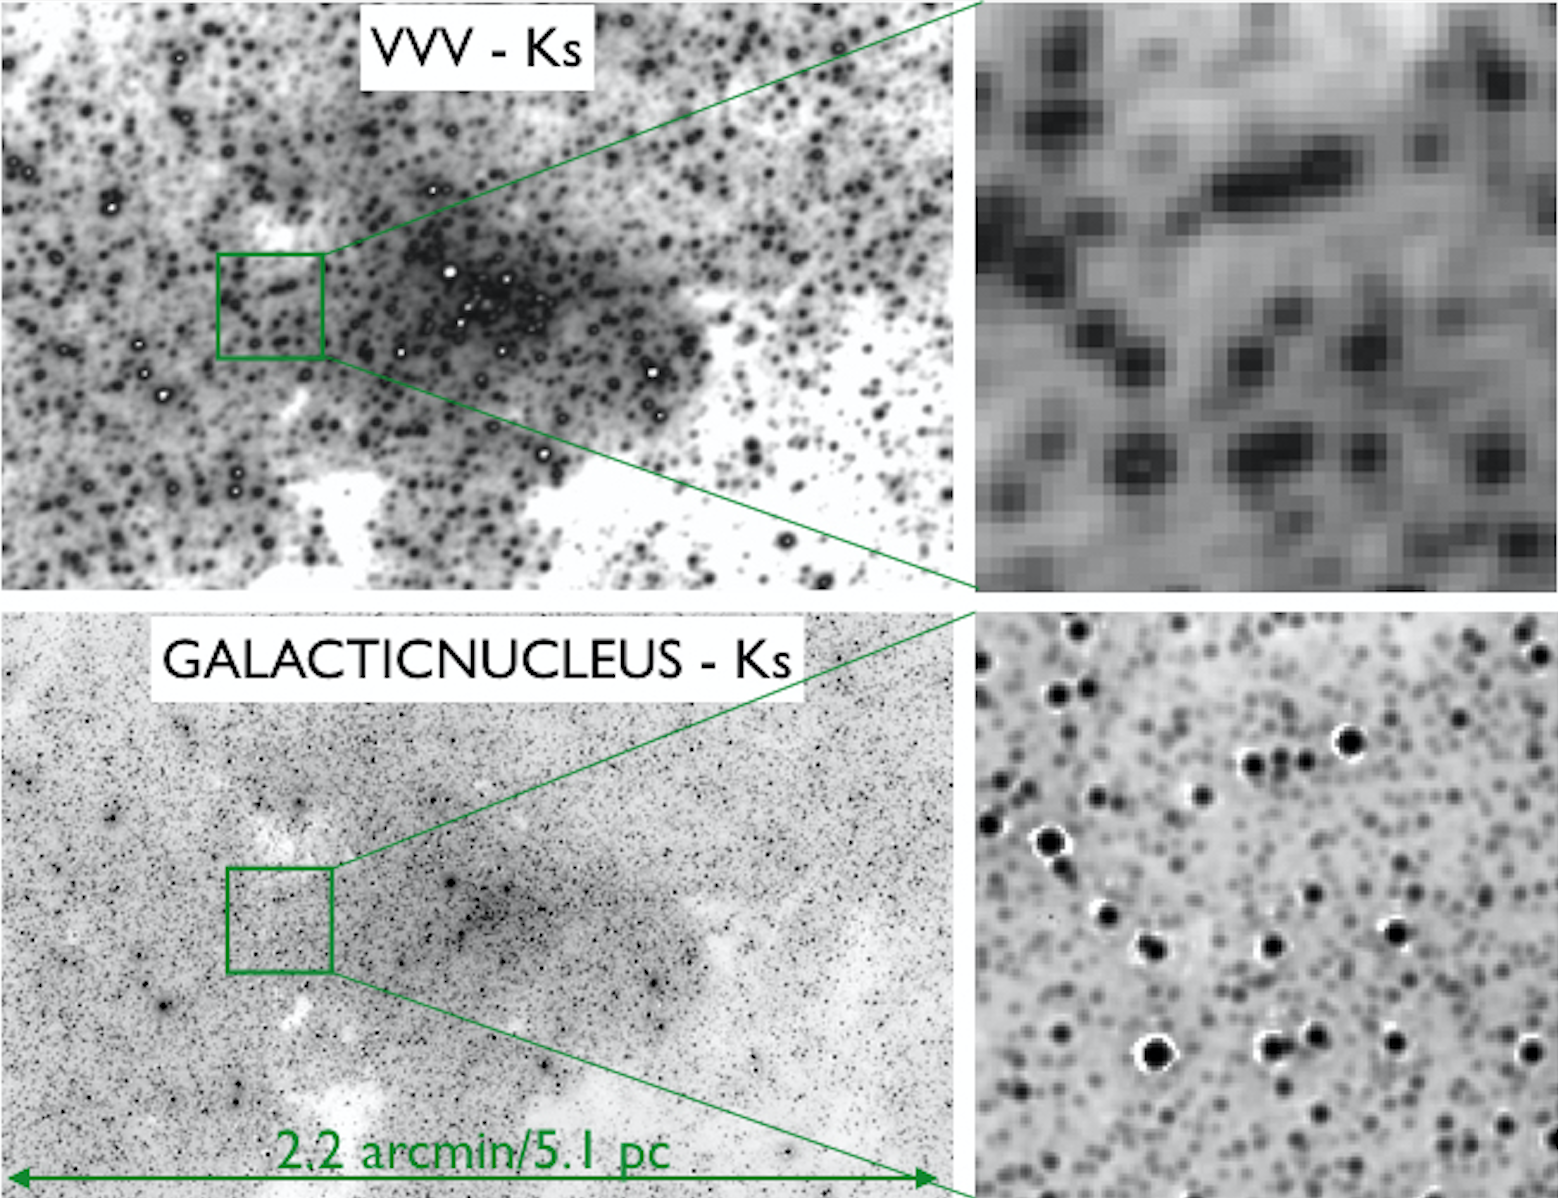 Comparison between Ks band images of the VVV and GALACTICNUCLEUS surveys.